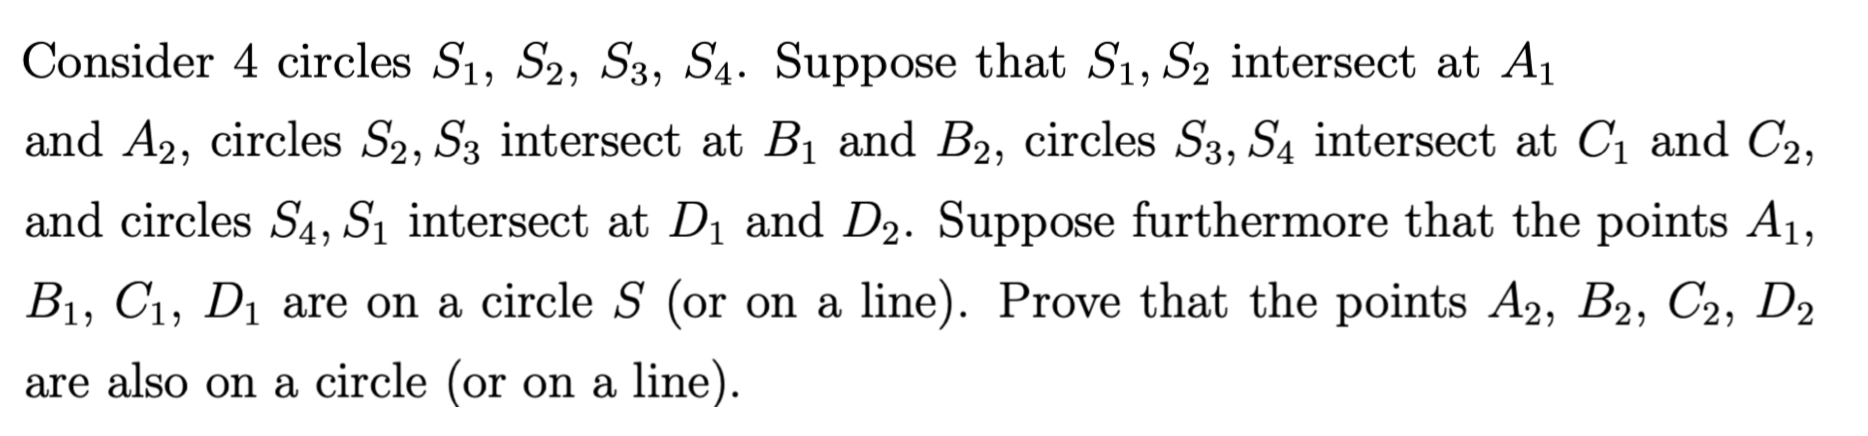 Consider 4 circles S1, S2, S3, S4. Suppose that S1, S2 intersect at A1
and A2, circles S2, S3 intersect at Bi and B2, circles S3, S4 intersect at Ci and C2,
and circles S4, S1 intersect at D1 and D2. Suppose furthermore that the points A1,
Prove that the points A2, B2, C2, D2
B1, C1, D1 are on a circle S (or on a line)
are also on a circle (or on a line).
